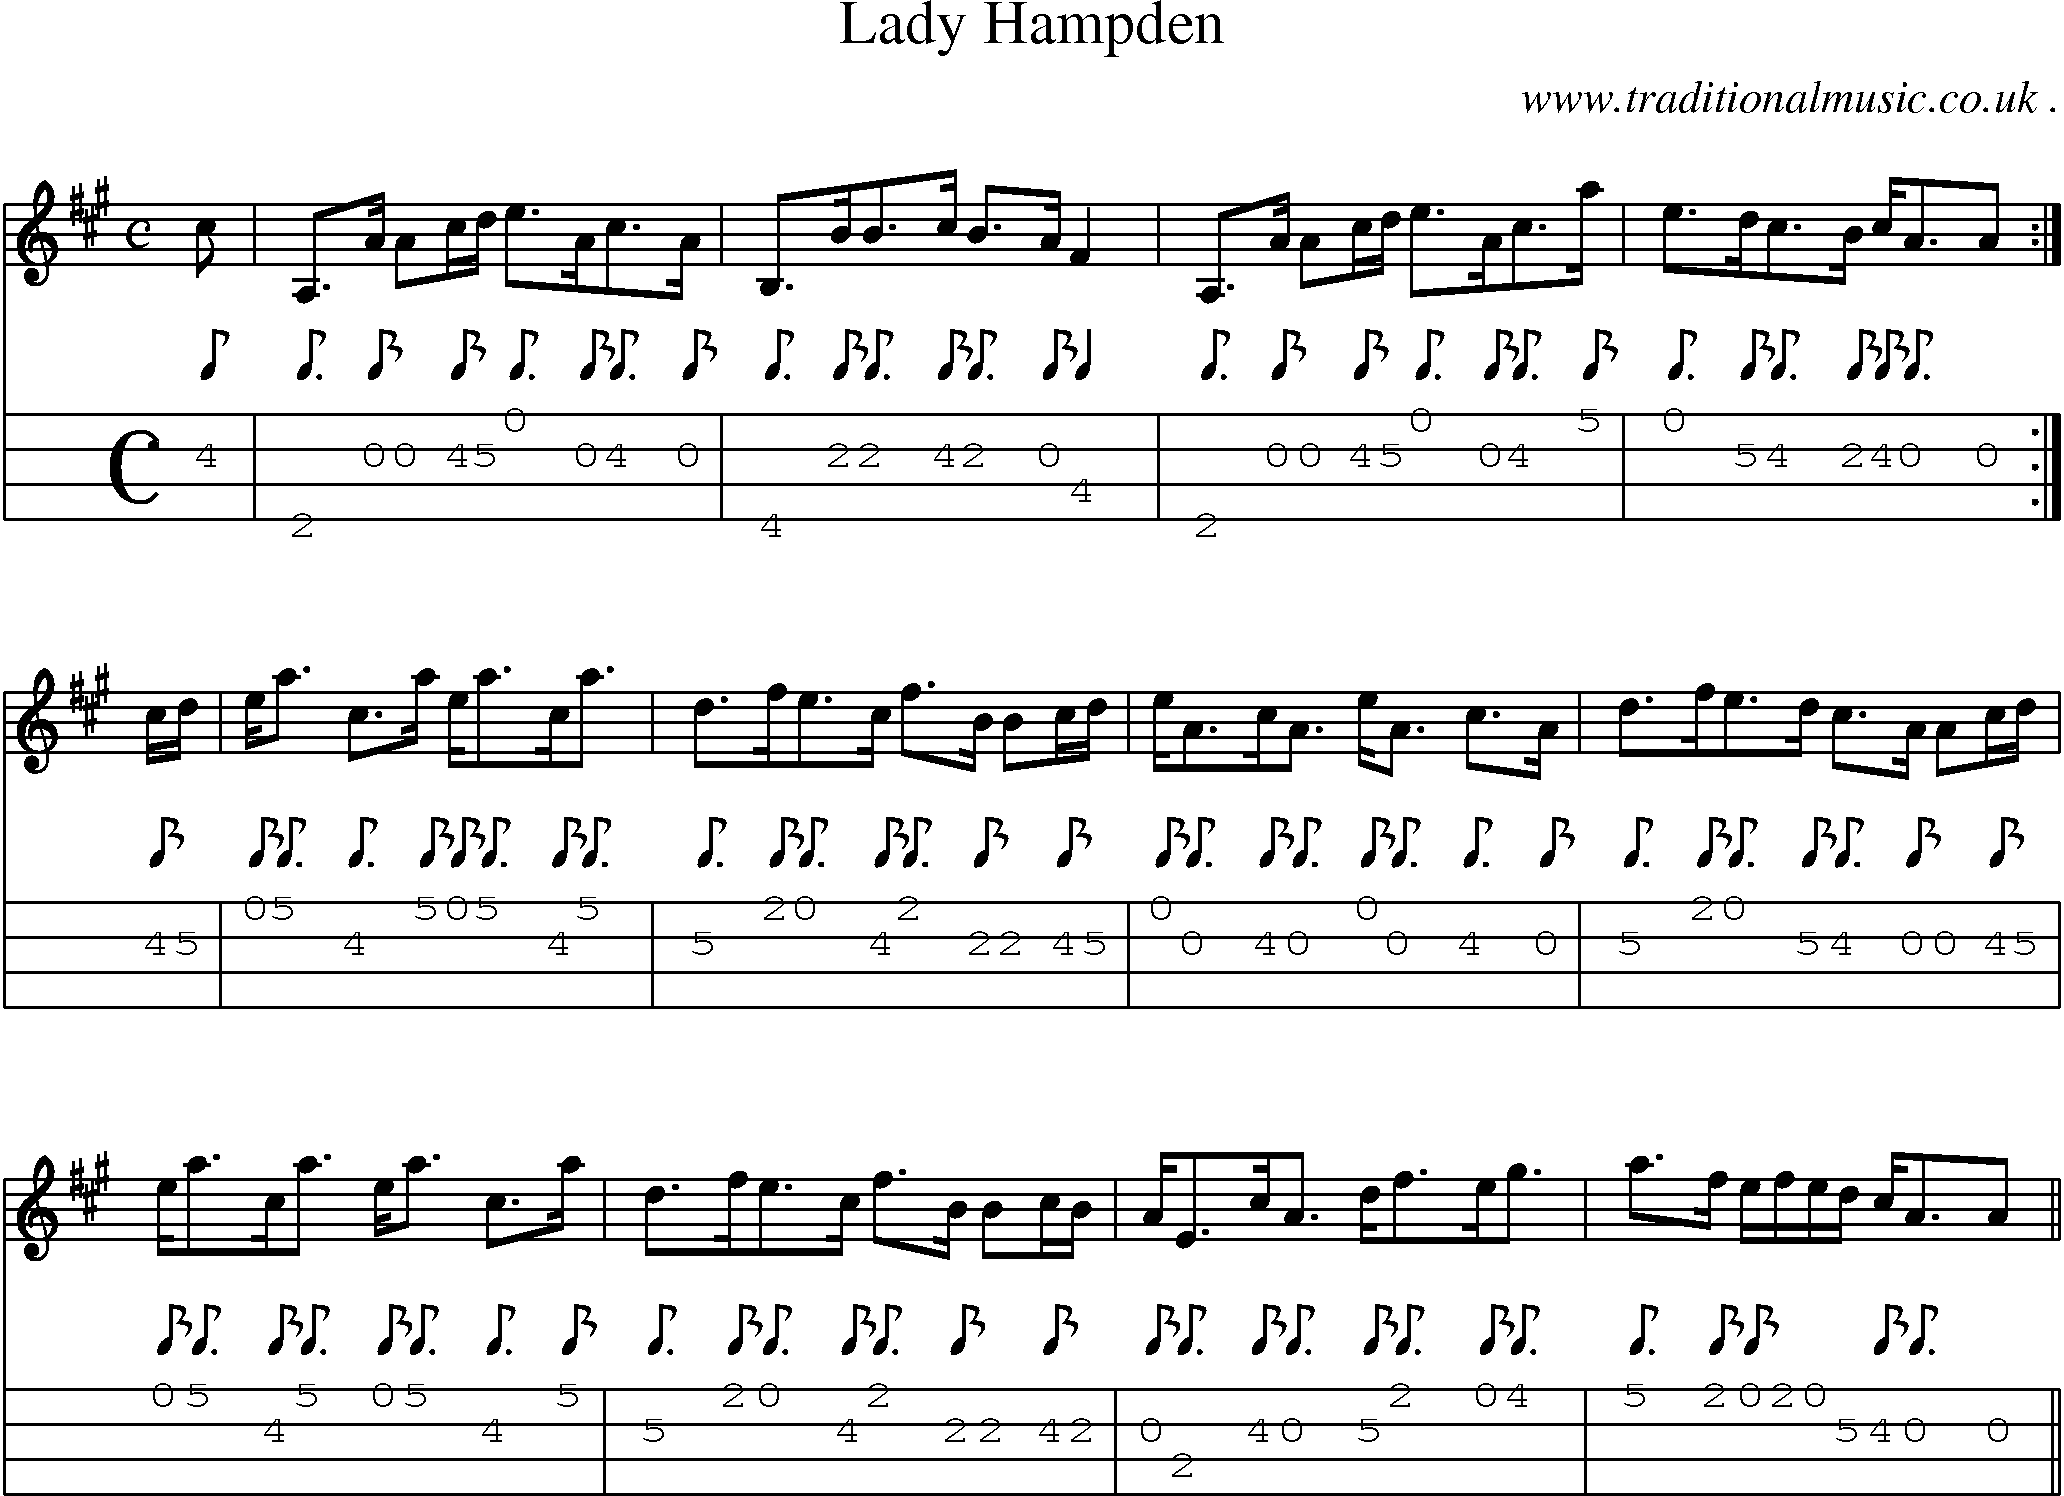 Sheet-music  score, Chords and Mandolin Tabs for Lady Hampden